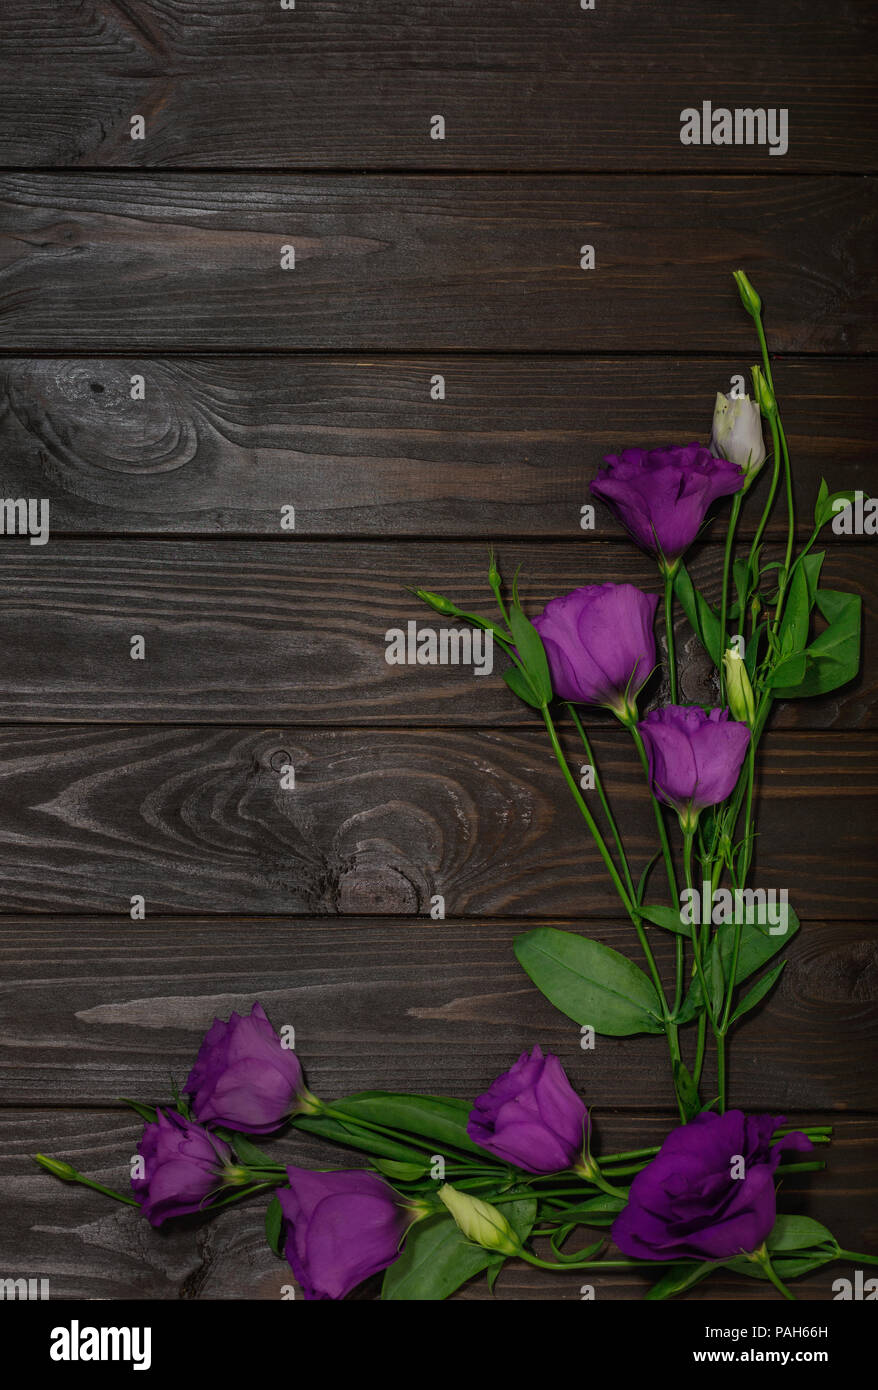 Violet flowers - eustoma, on a brown wooden background. Copy space. Stock Photo